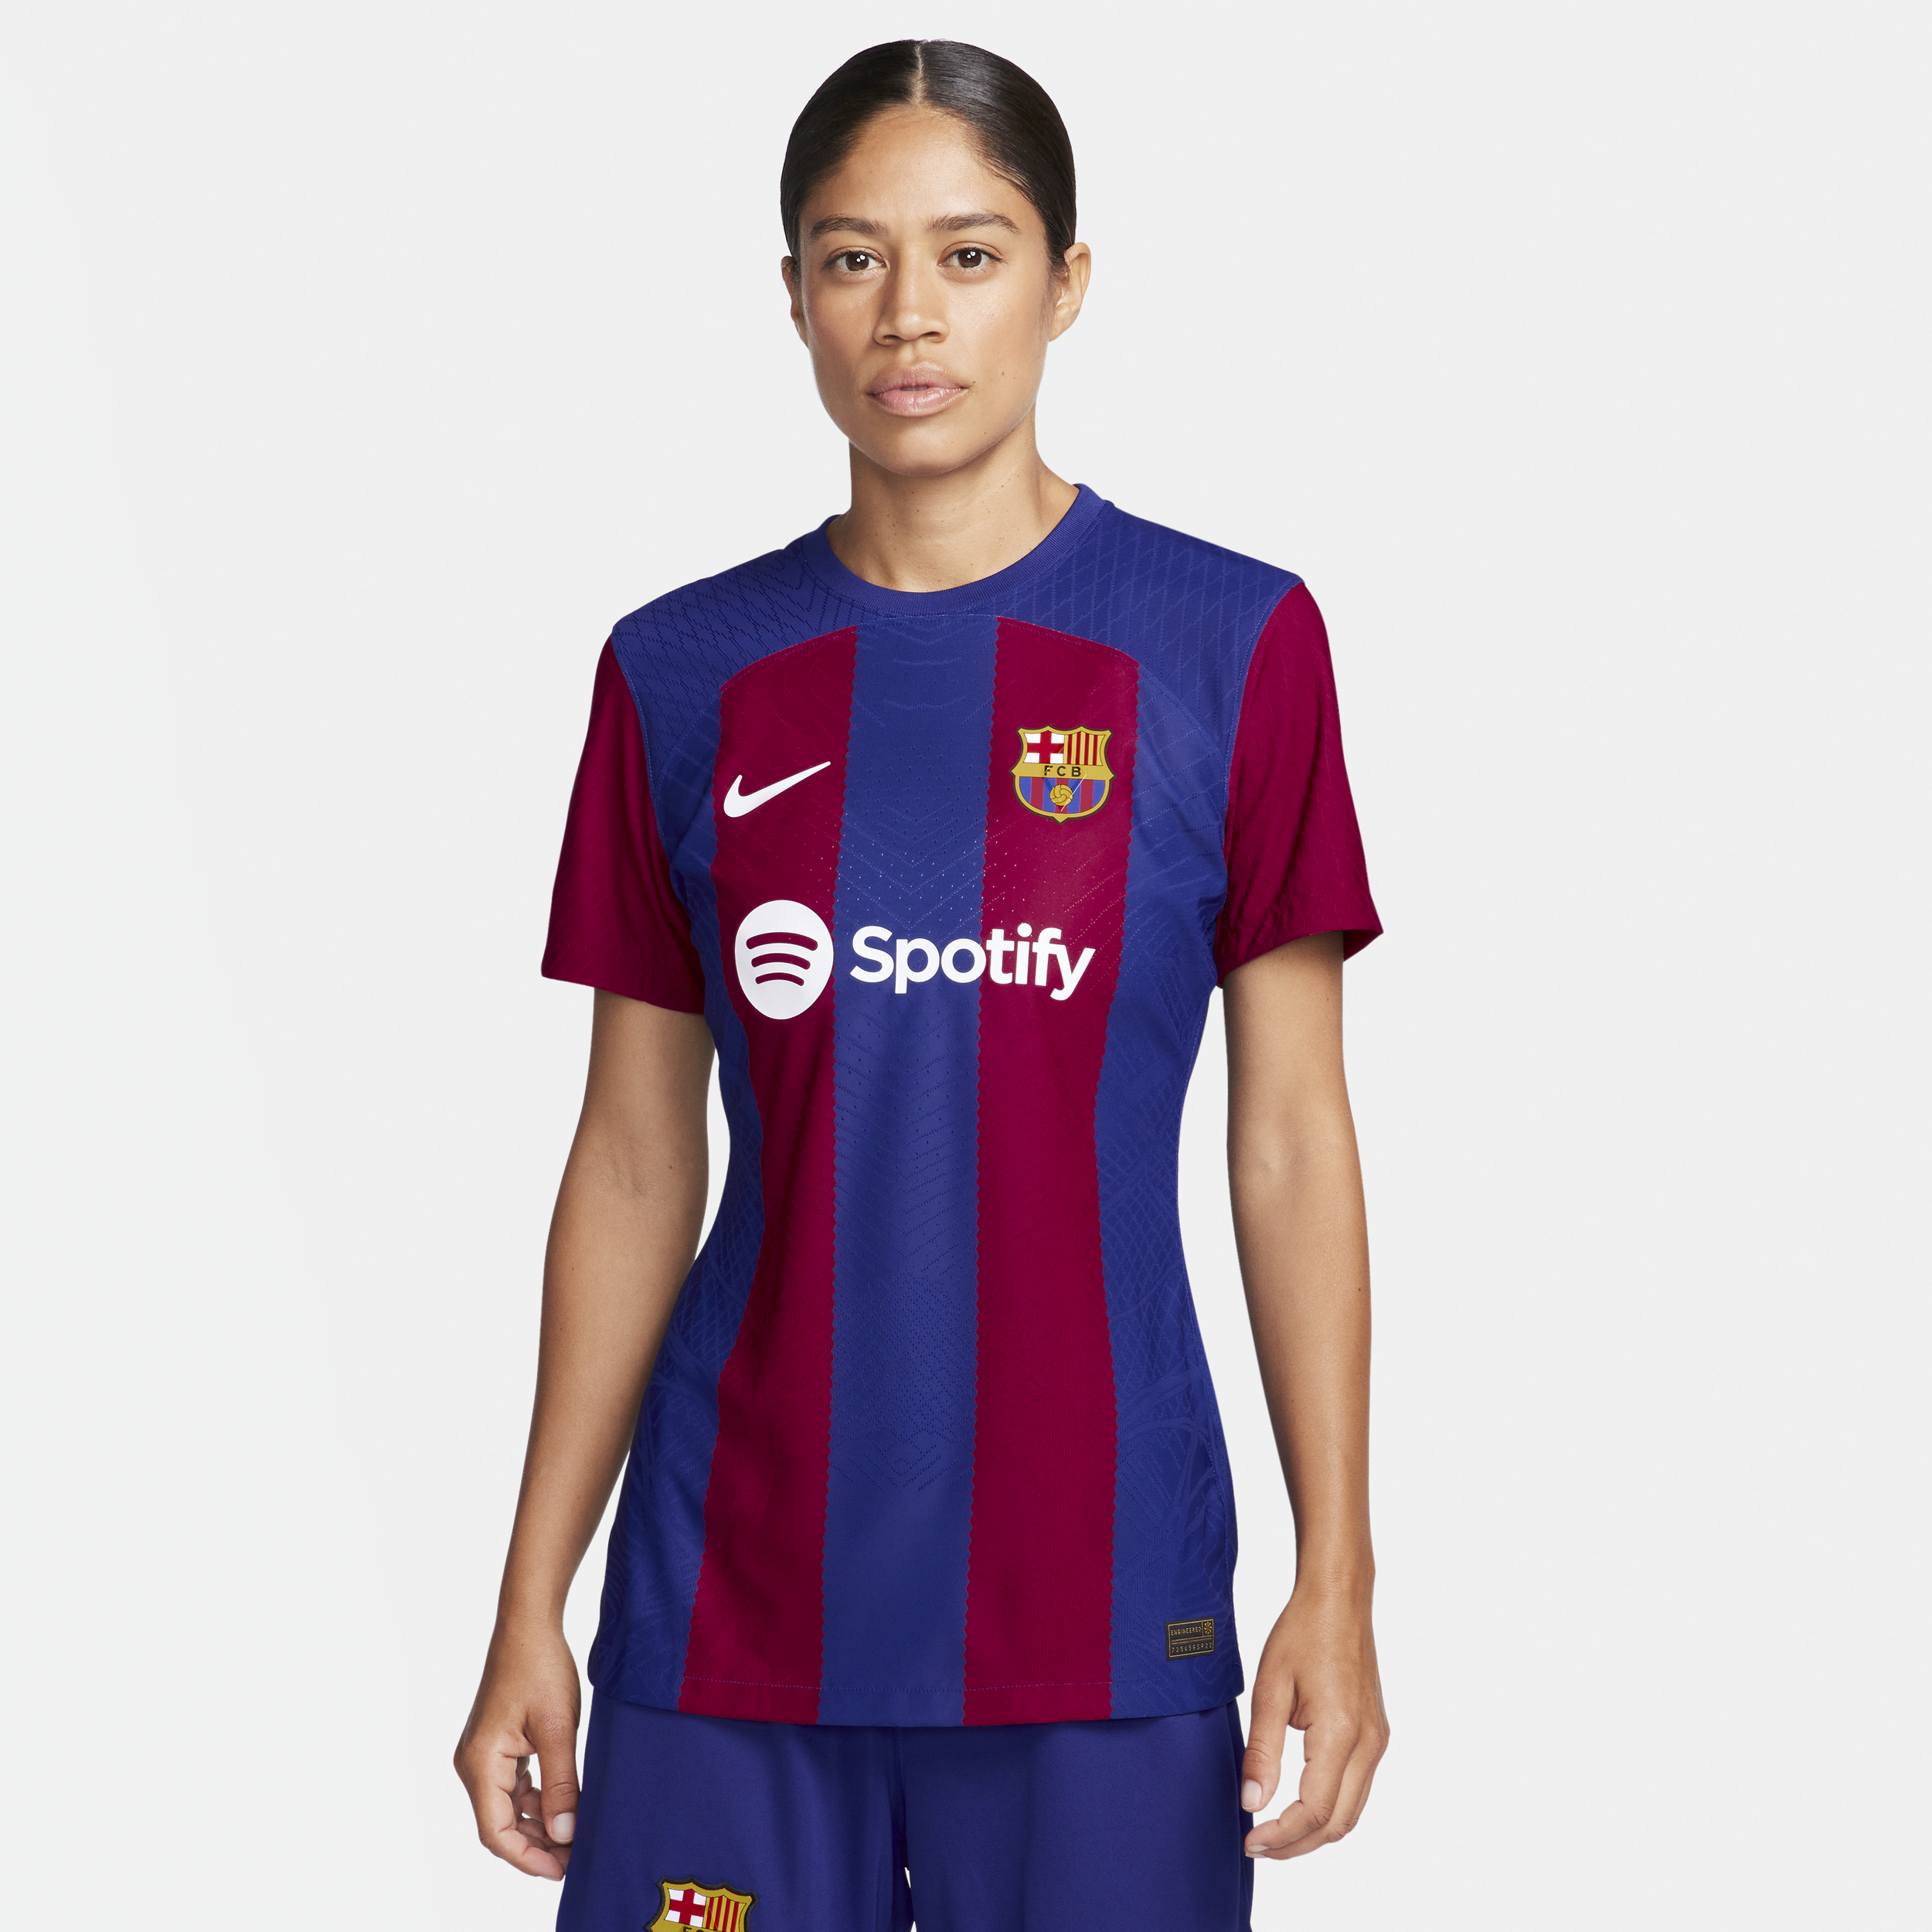 FC Barcelona 2023/24 Match Thuis Nike Dri-FIT ADV voetbalshirt voor dames - Blauw